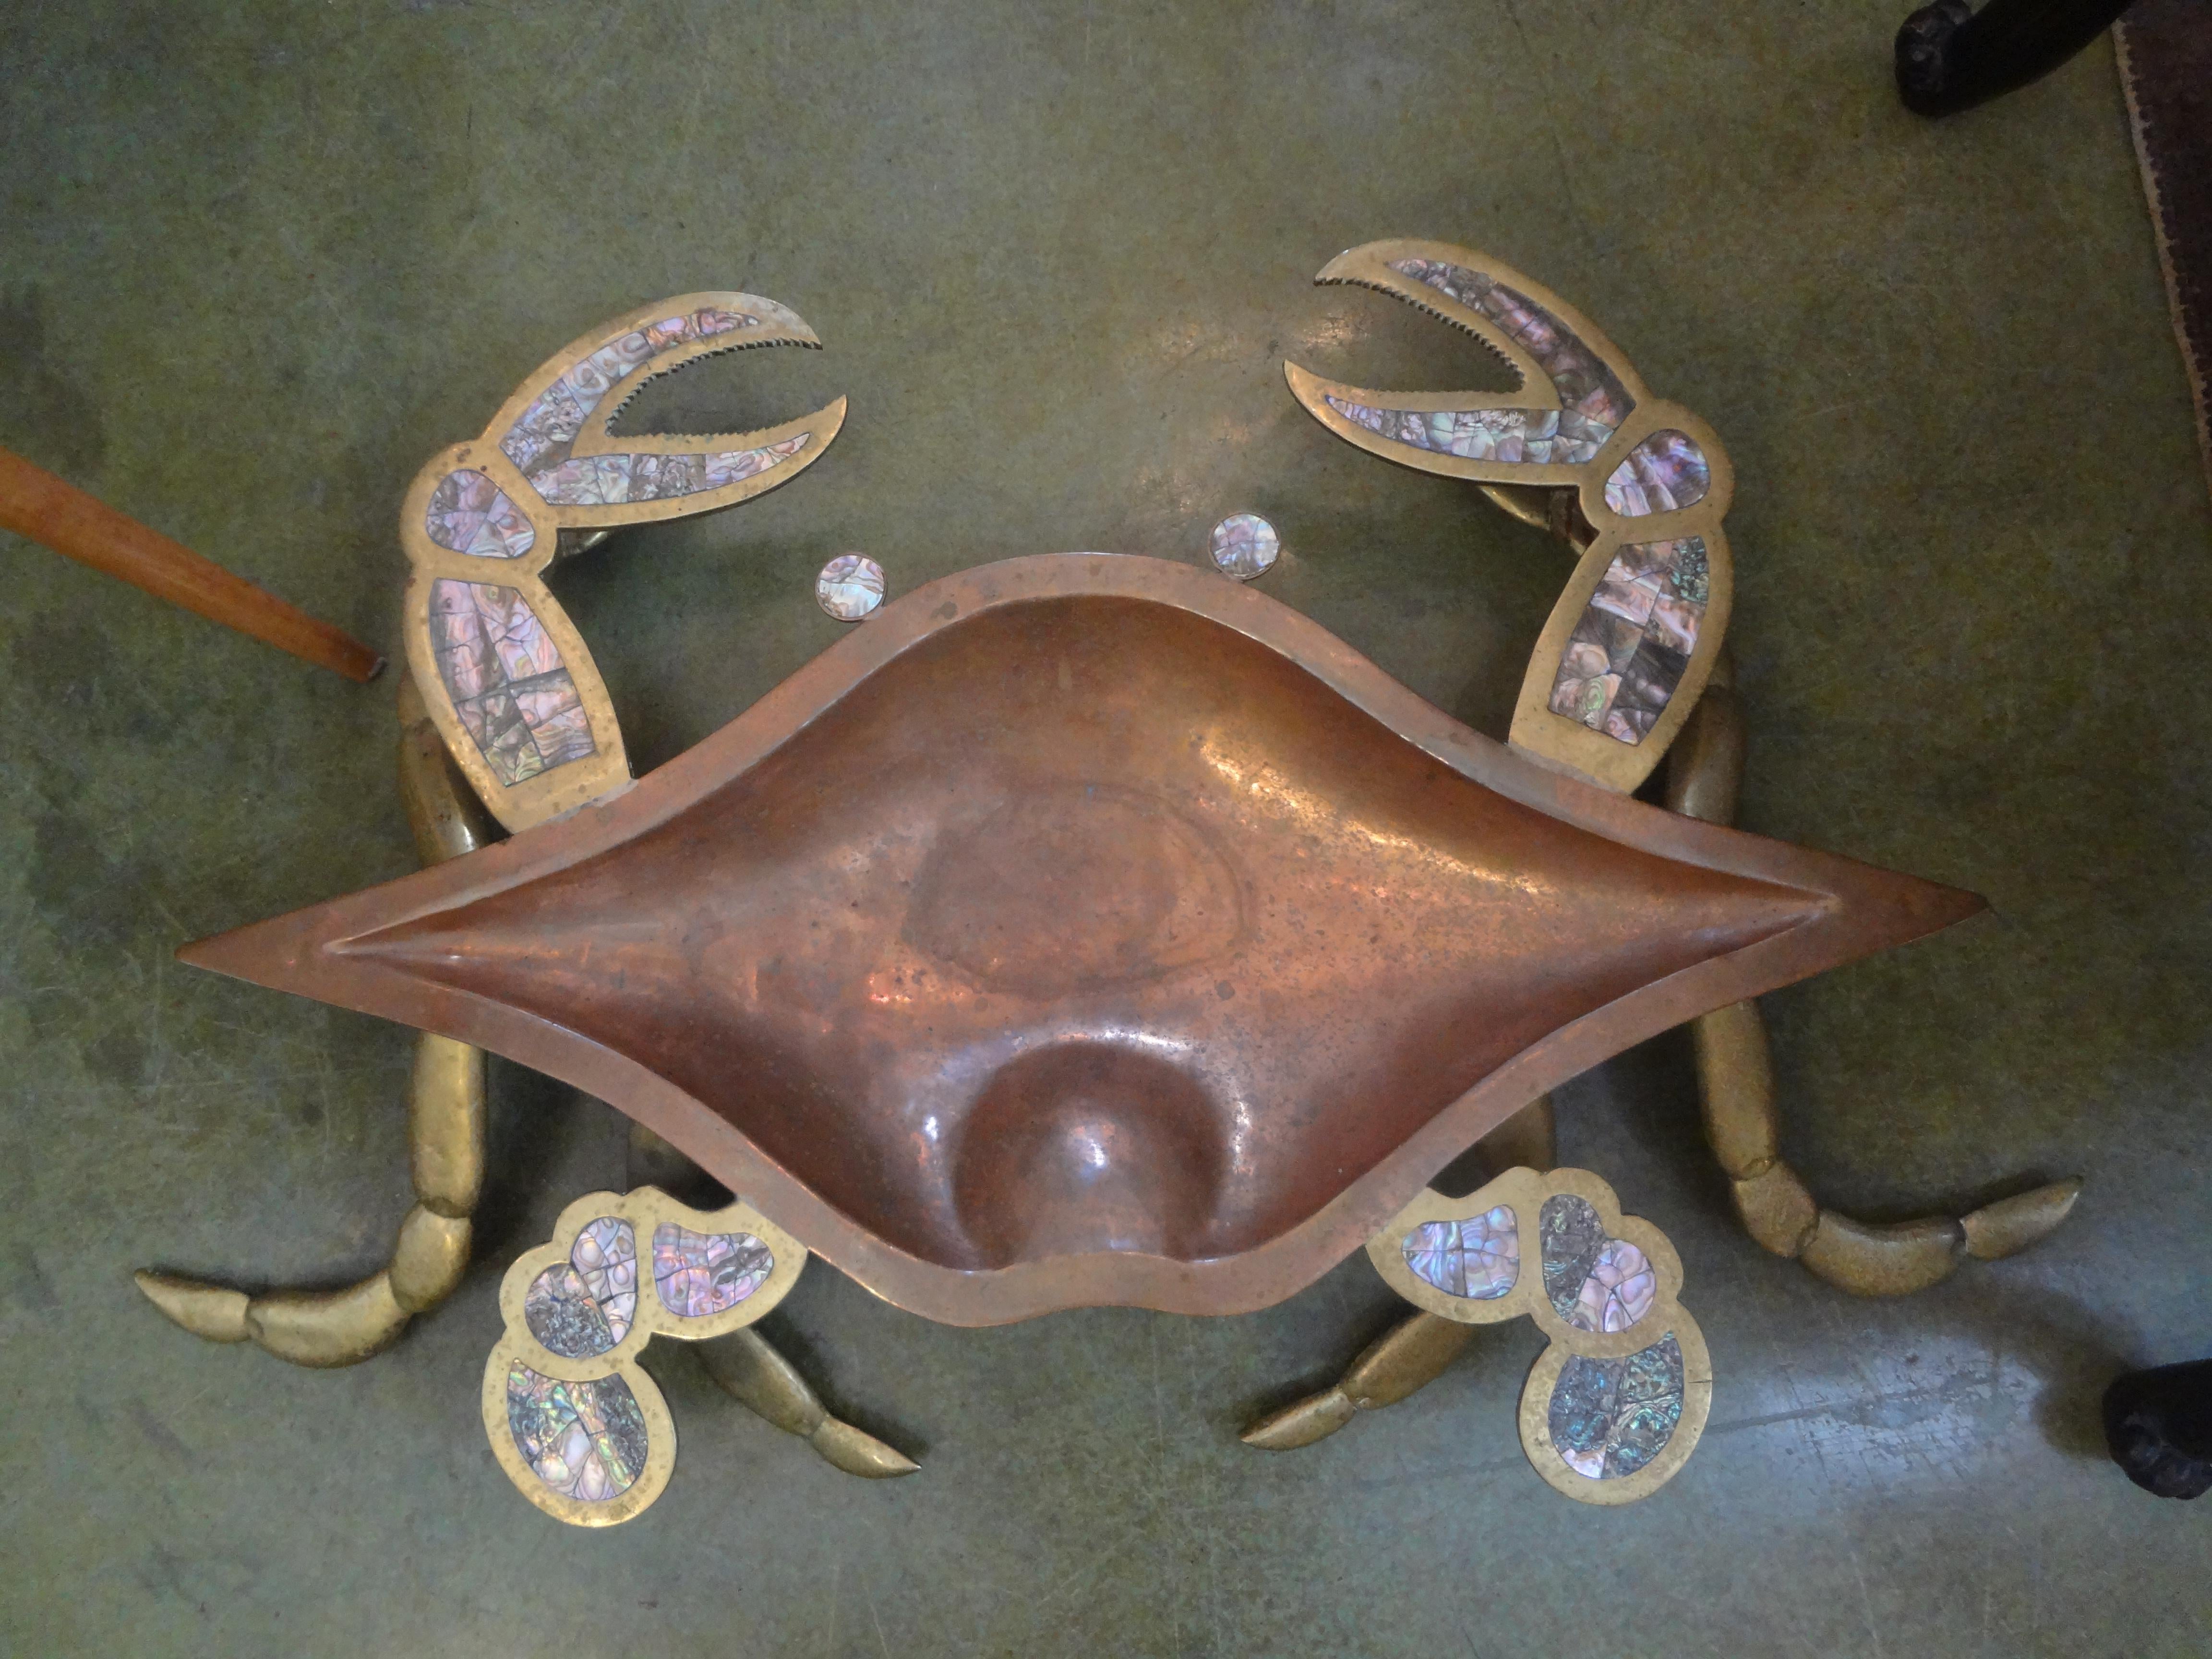 Stunning and rare Los Castillo Taxco style Mexican modernist mixed metal-brass and copper-crab dish Inlaid with Abalone. This fantastic monumental piece is the largest we have ever seen-36